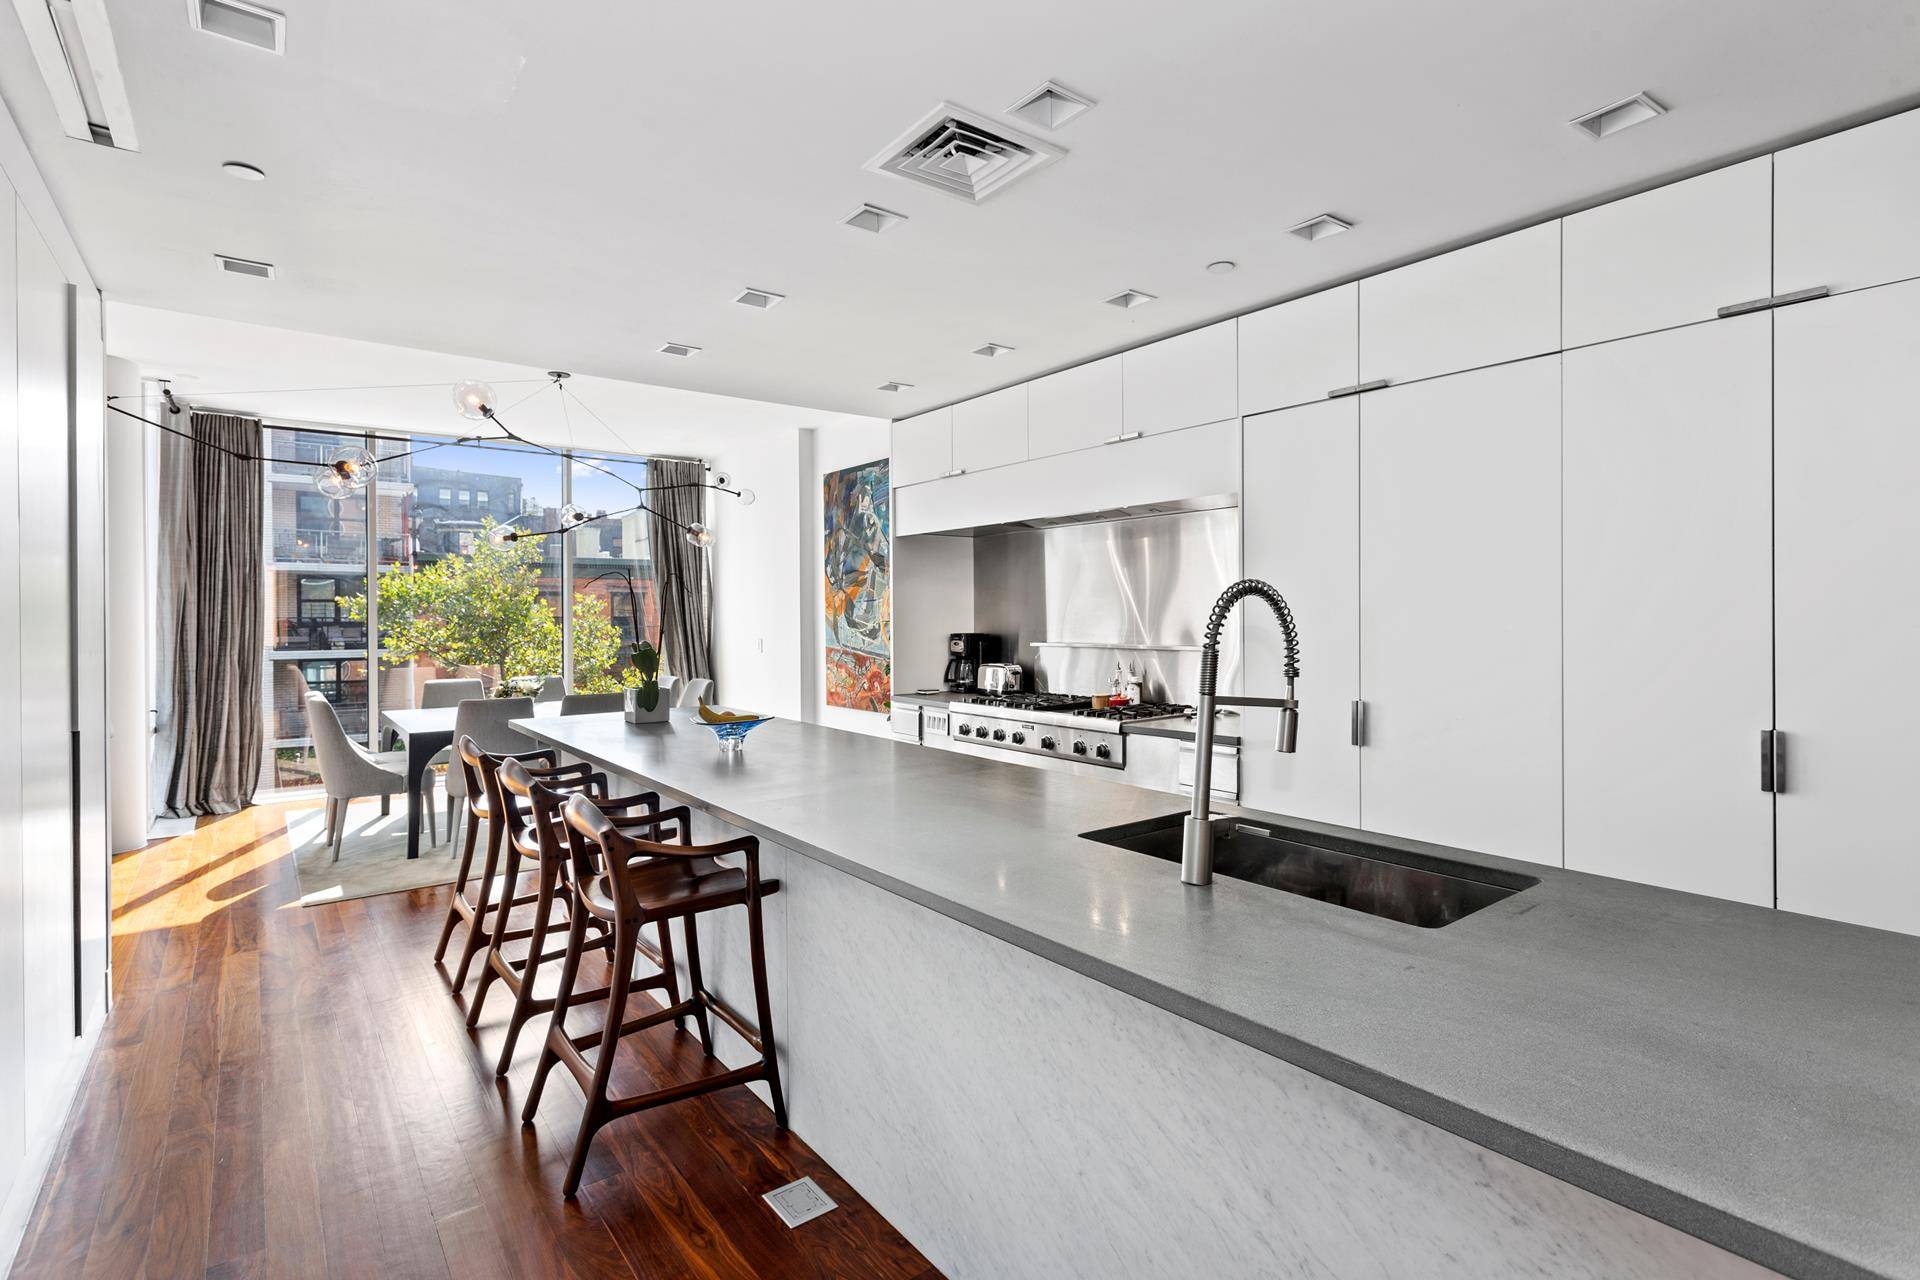 Welcome to 57 Irving Place A Distinctively Modern, Chic, and Sleek Boutique Condominium in Sought After Gramercy Park.